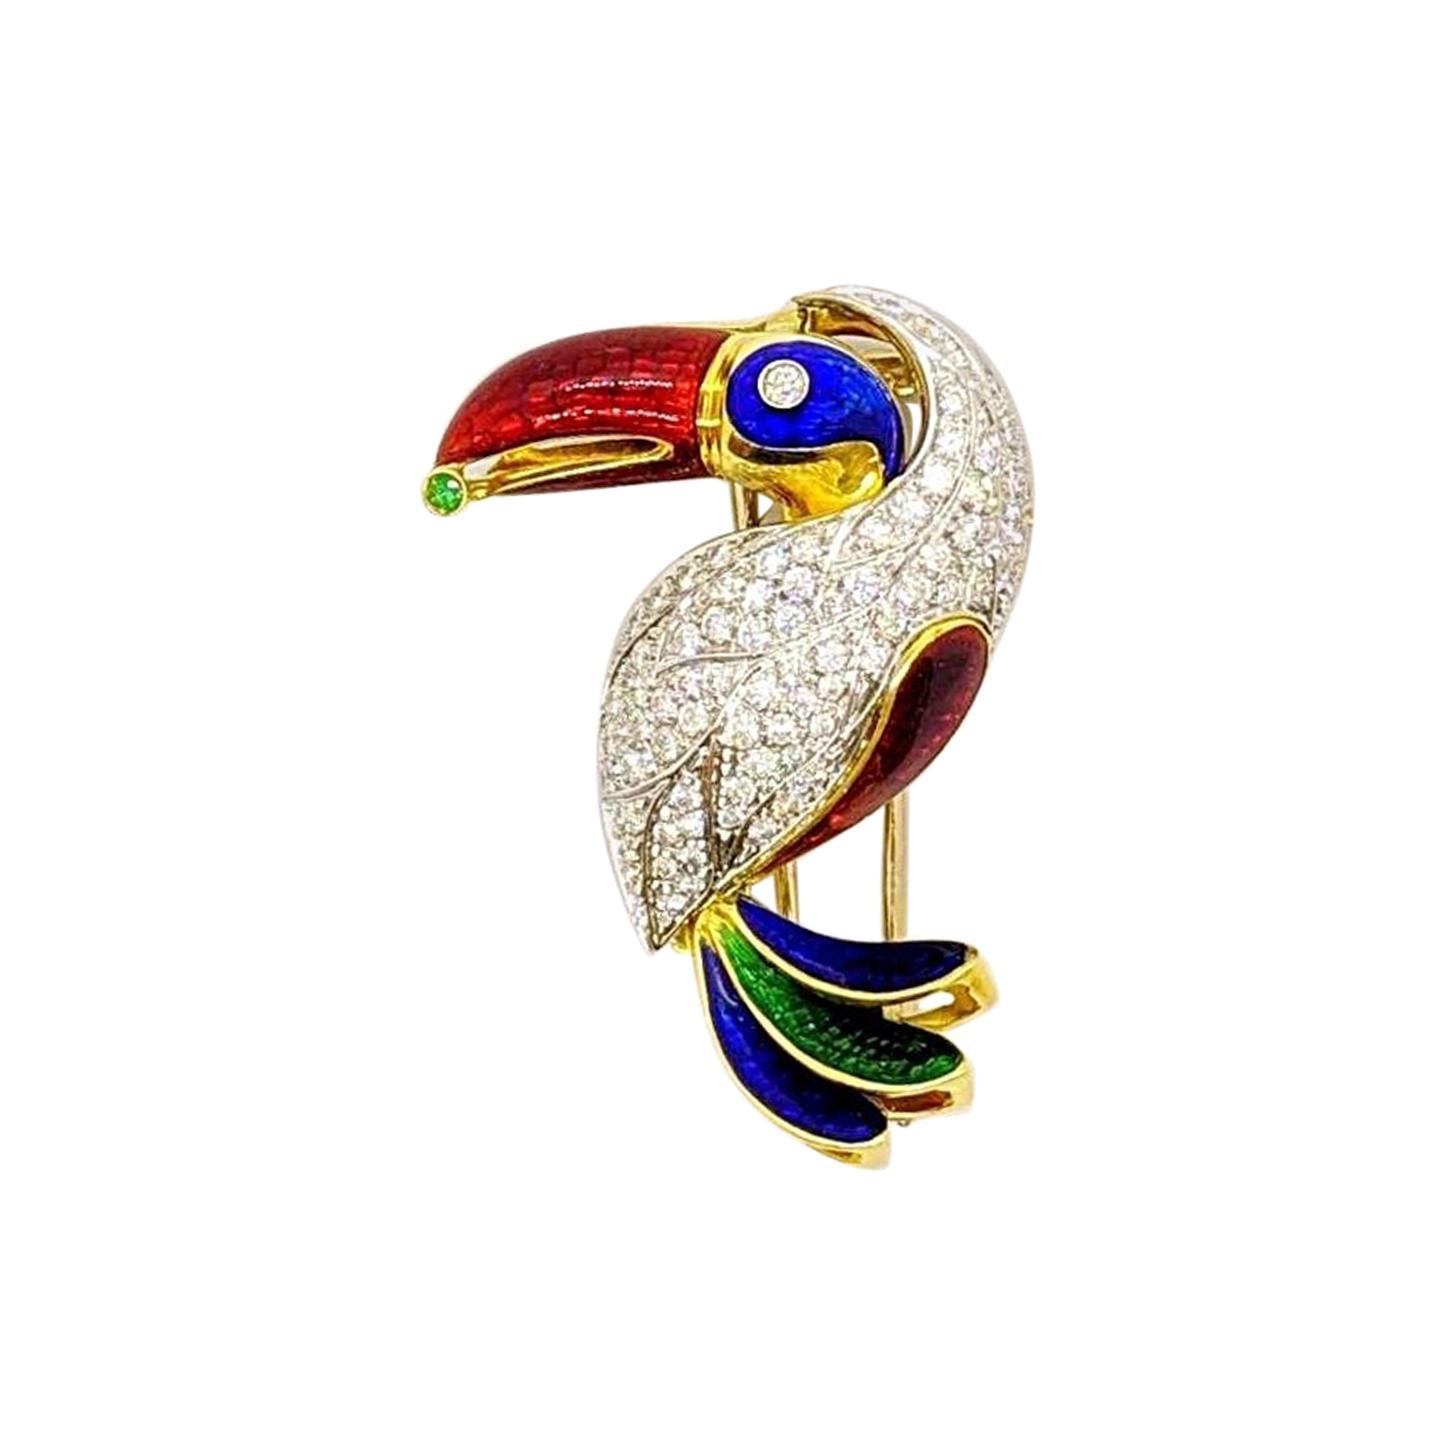 18KT Yellow & White Gold Toucan Brooch with 2.18 Carat Diamonds & Colored Enamel